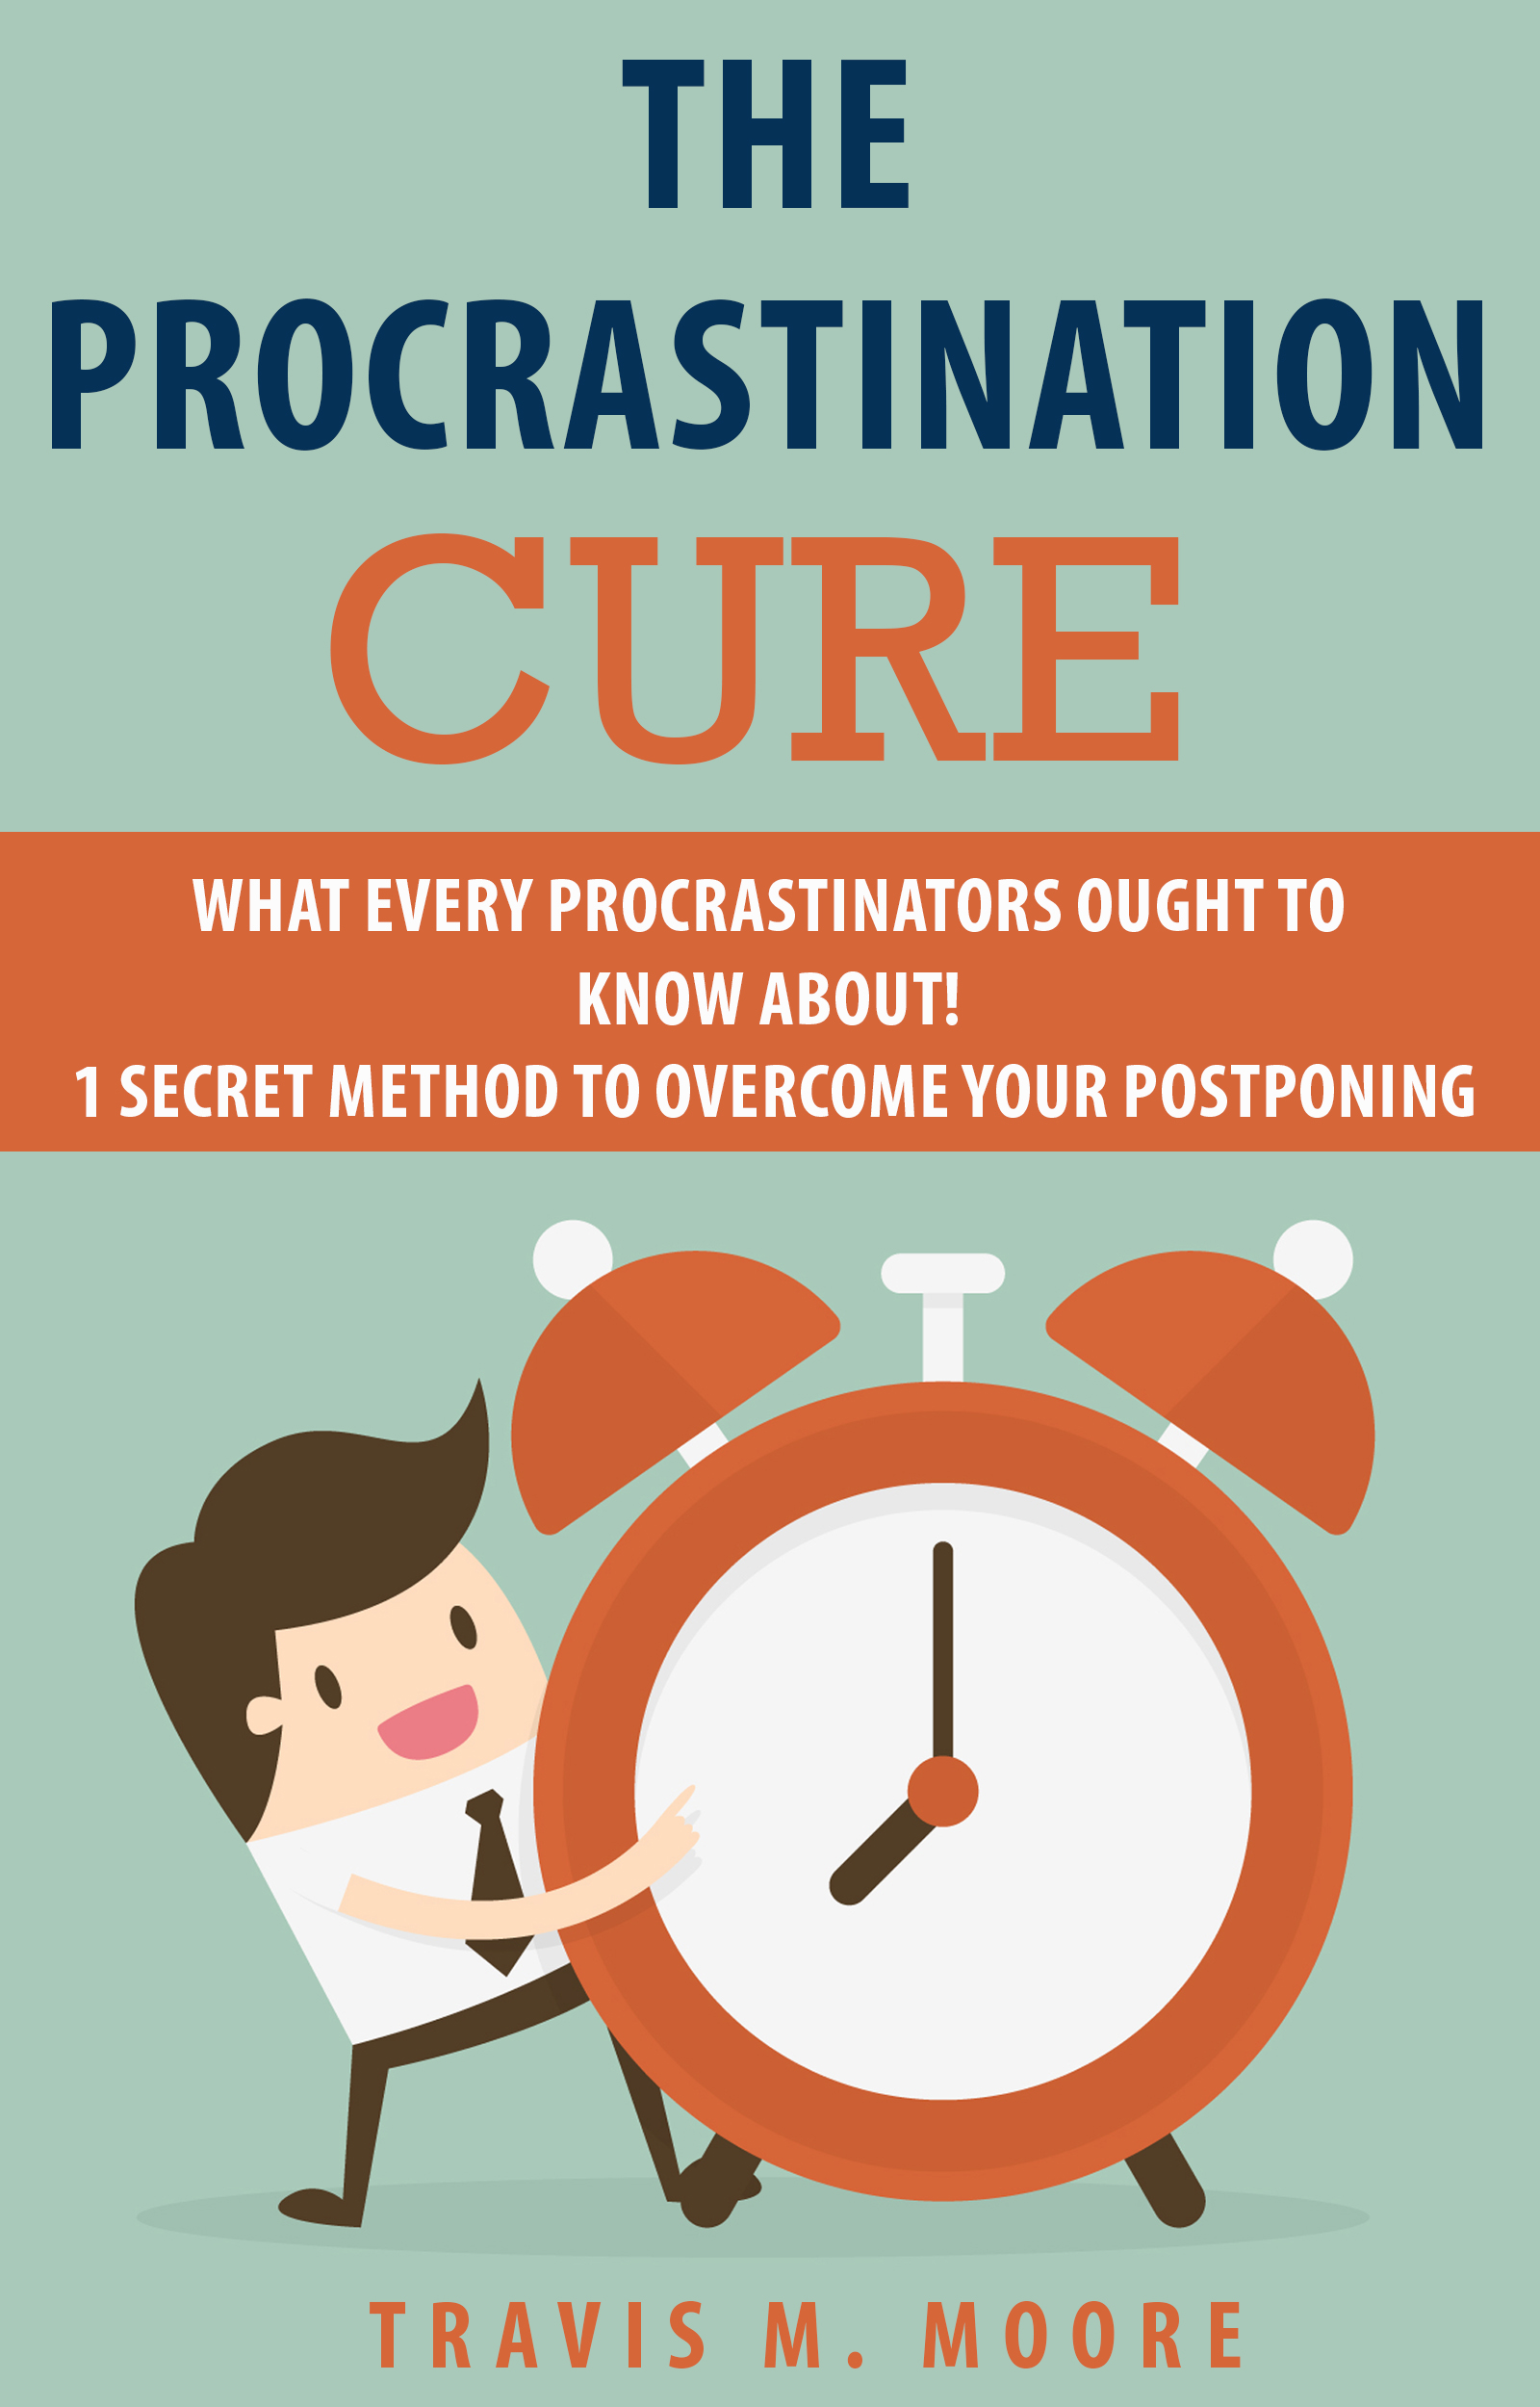 FREE: The Procrastination Cure: What Every Procrastinators Ought to Know About! 1 Secret Method to Overcome Your Postponing by Travis M. Moore